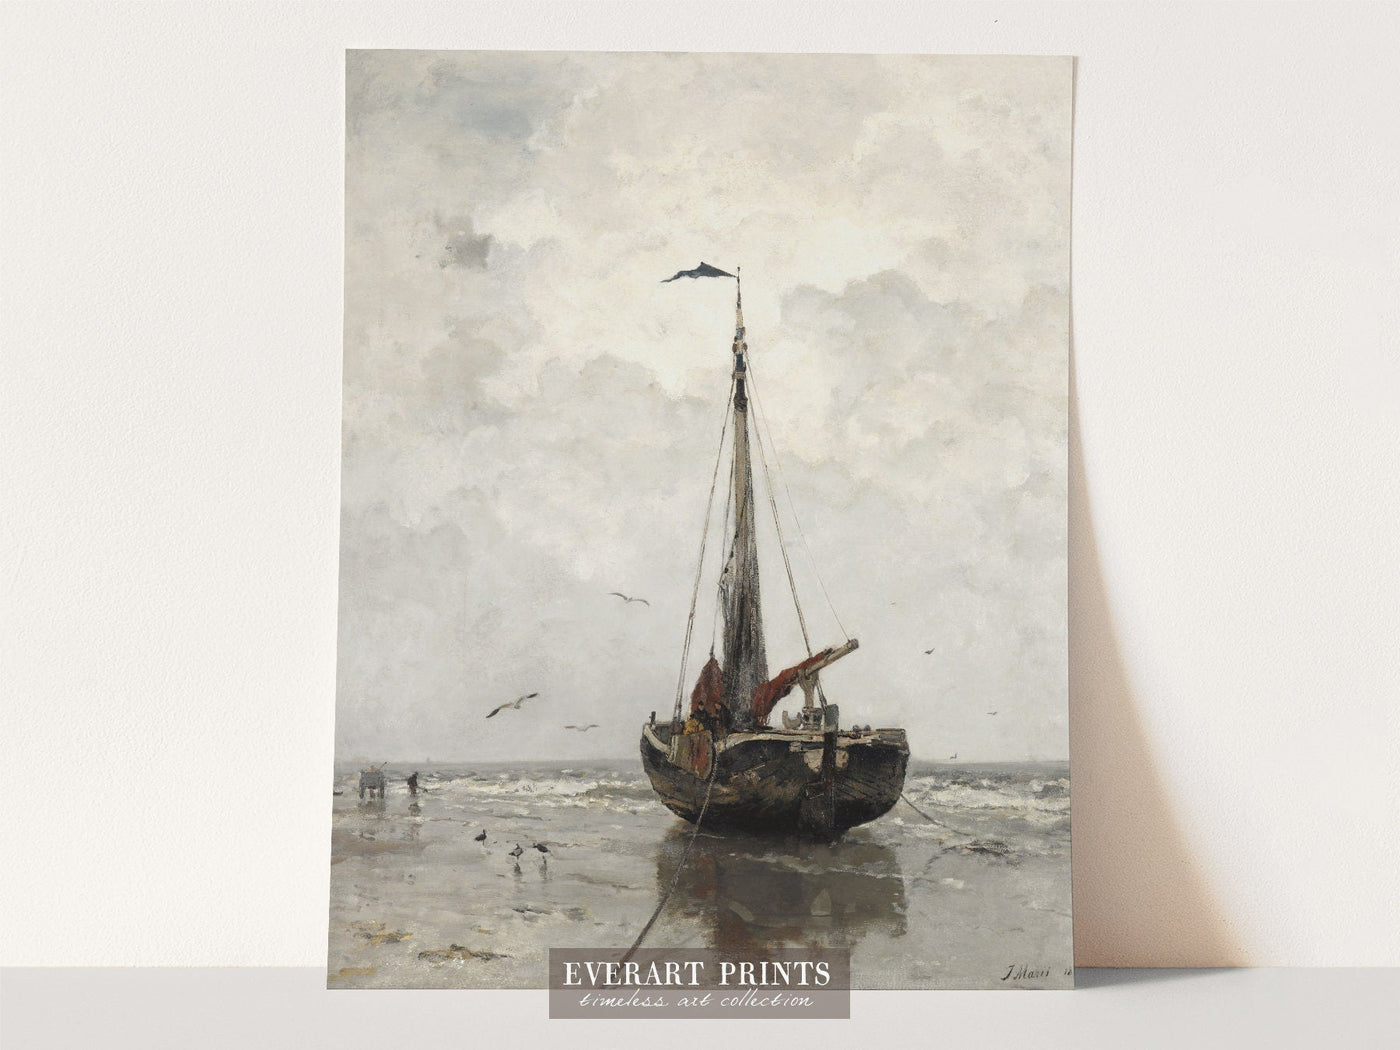 The French Coast - Gallery Wall Print Set